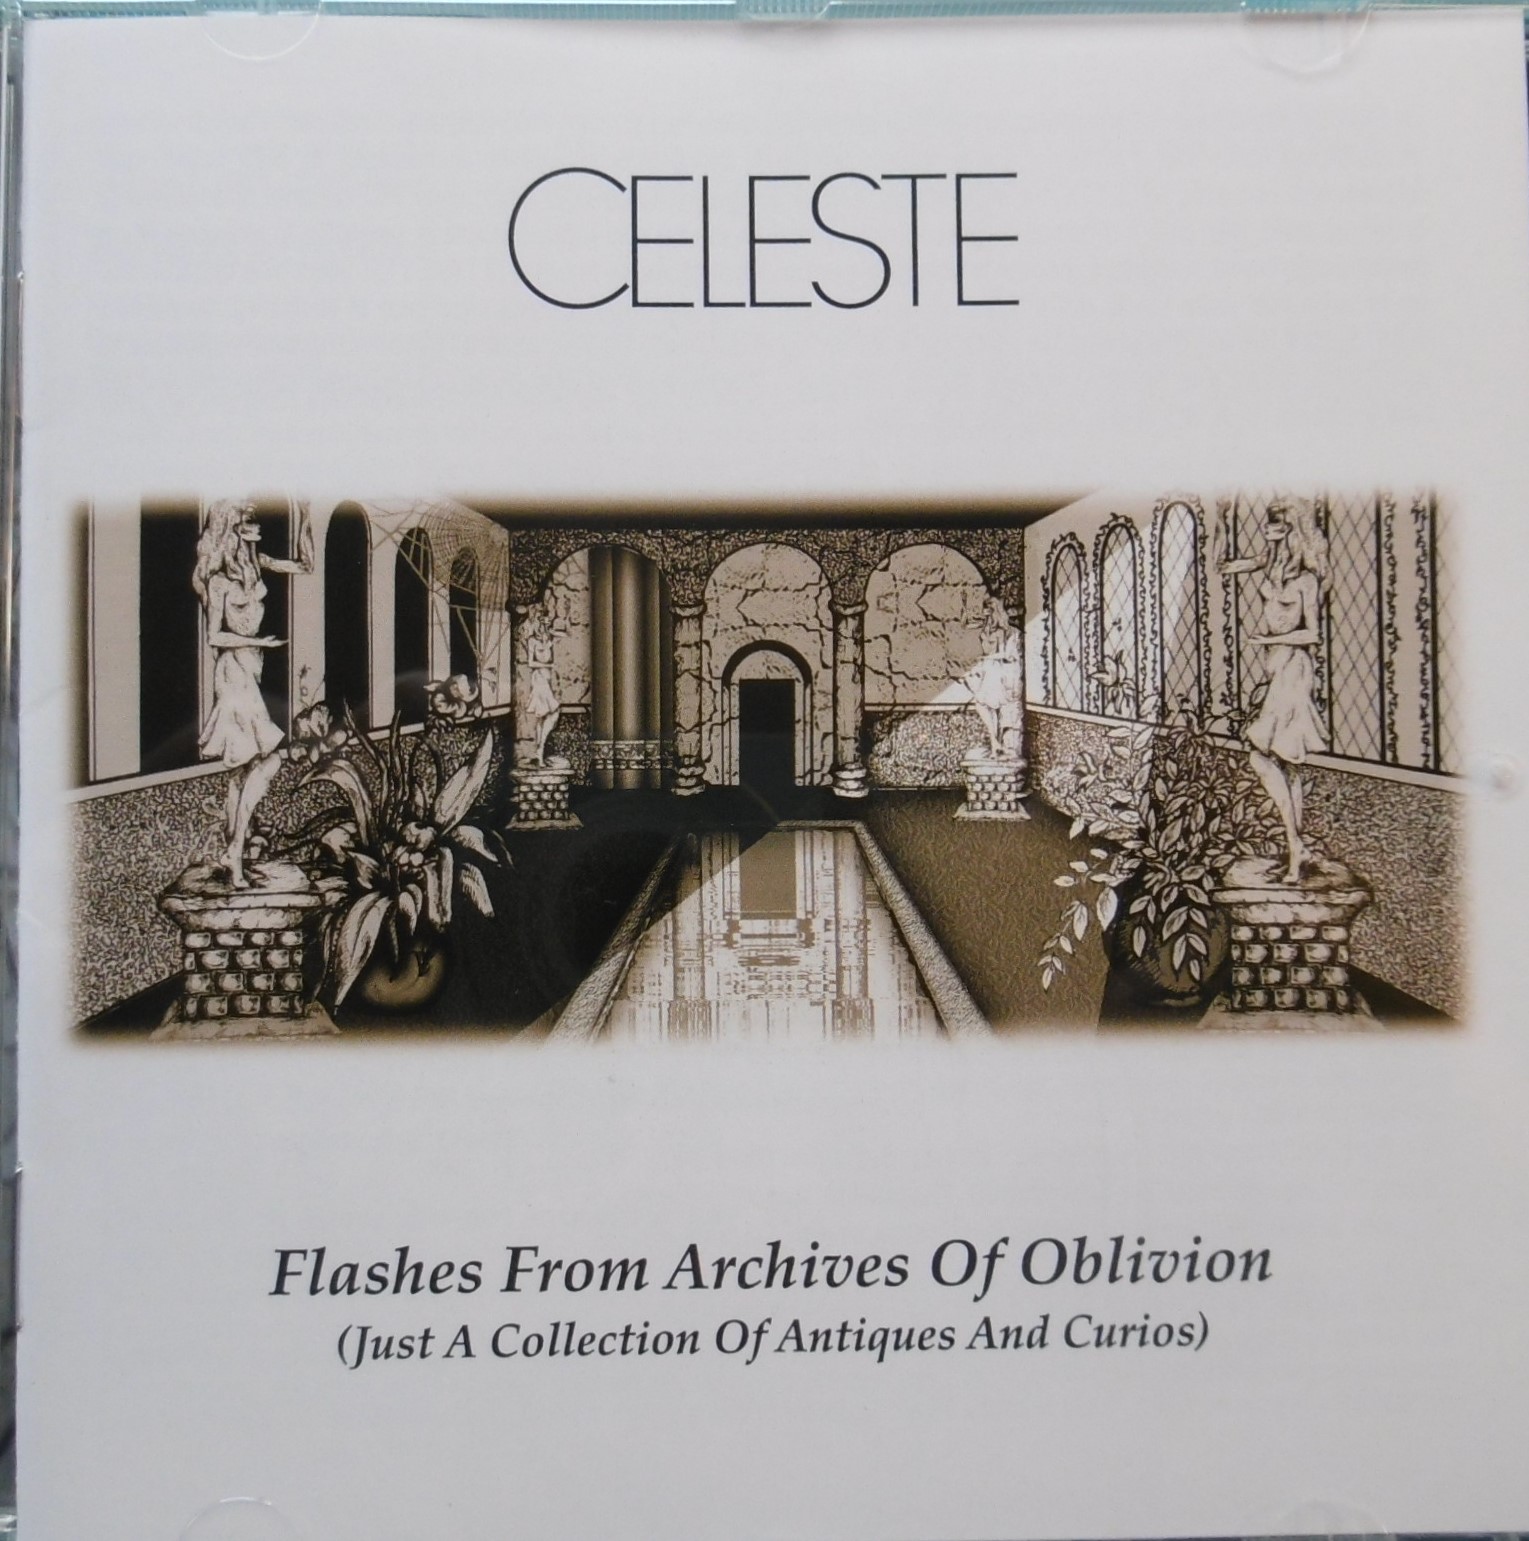 CELESTE - Flashes From Archives Of Oblivion CD